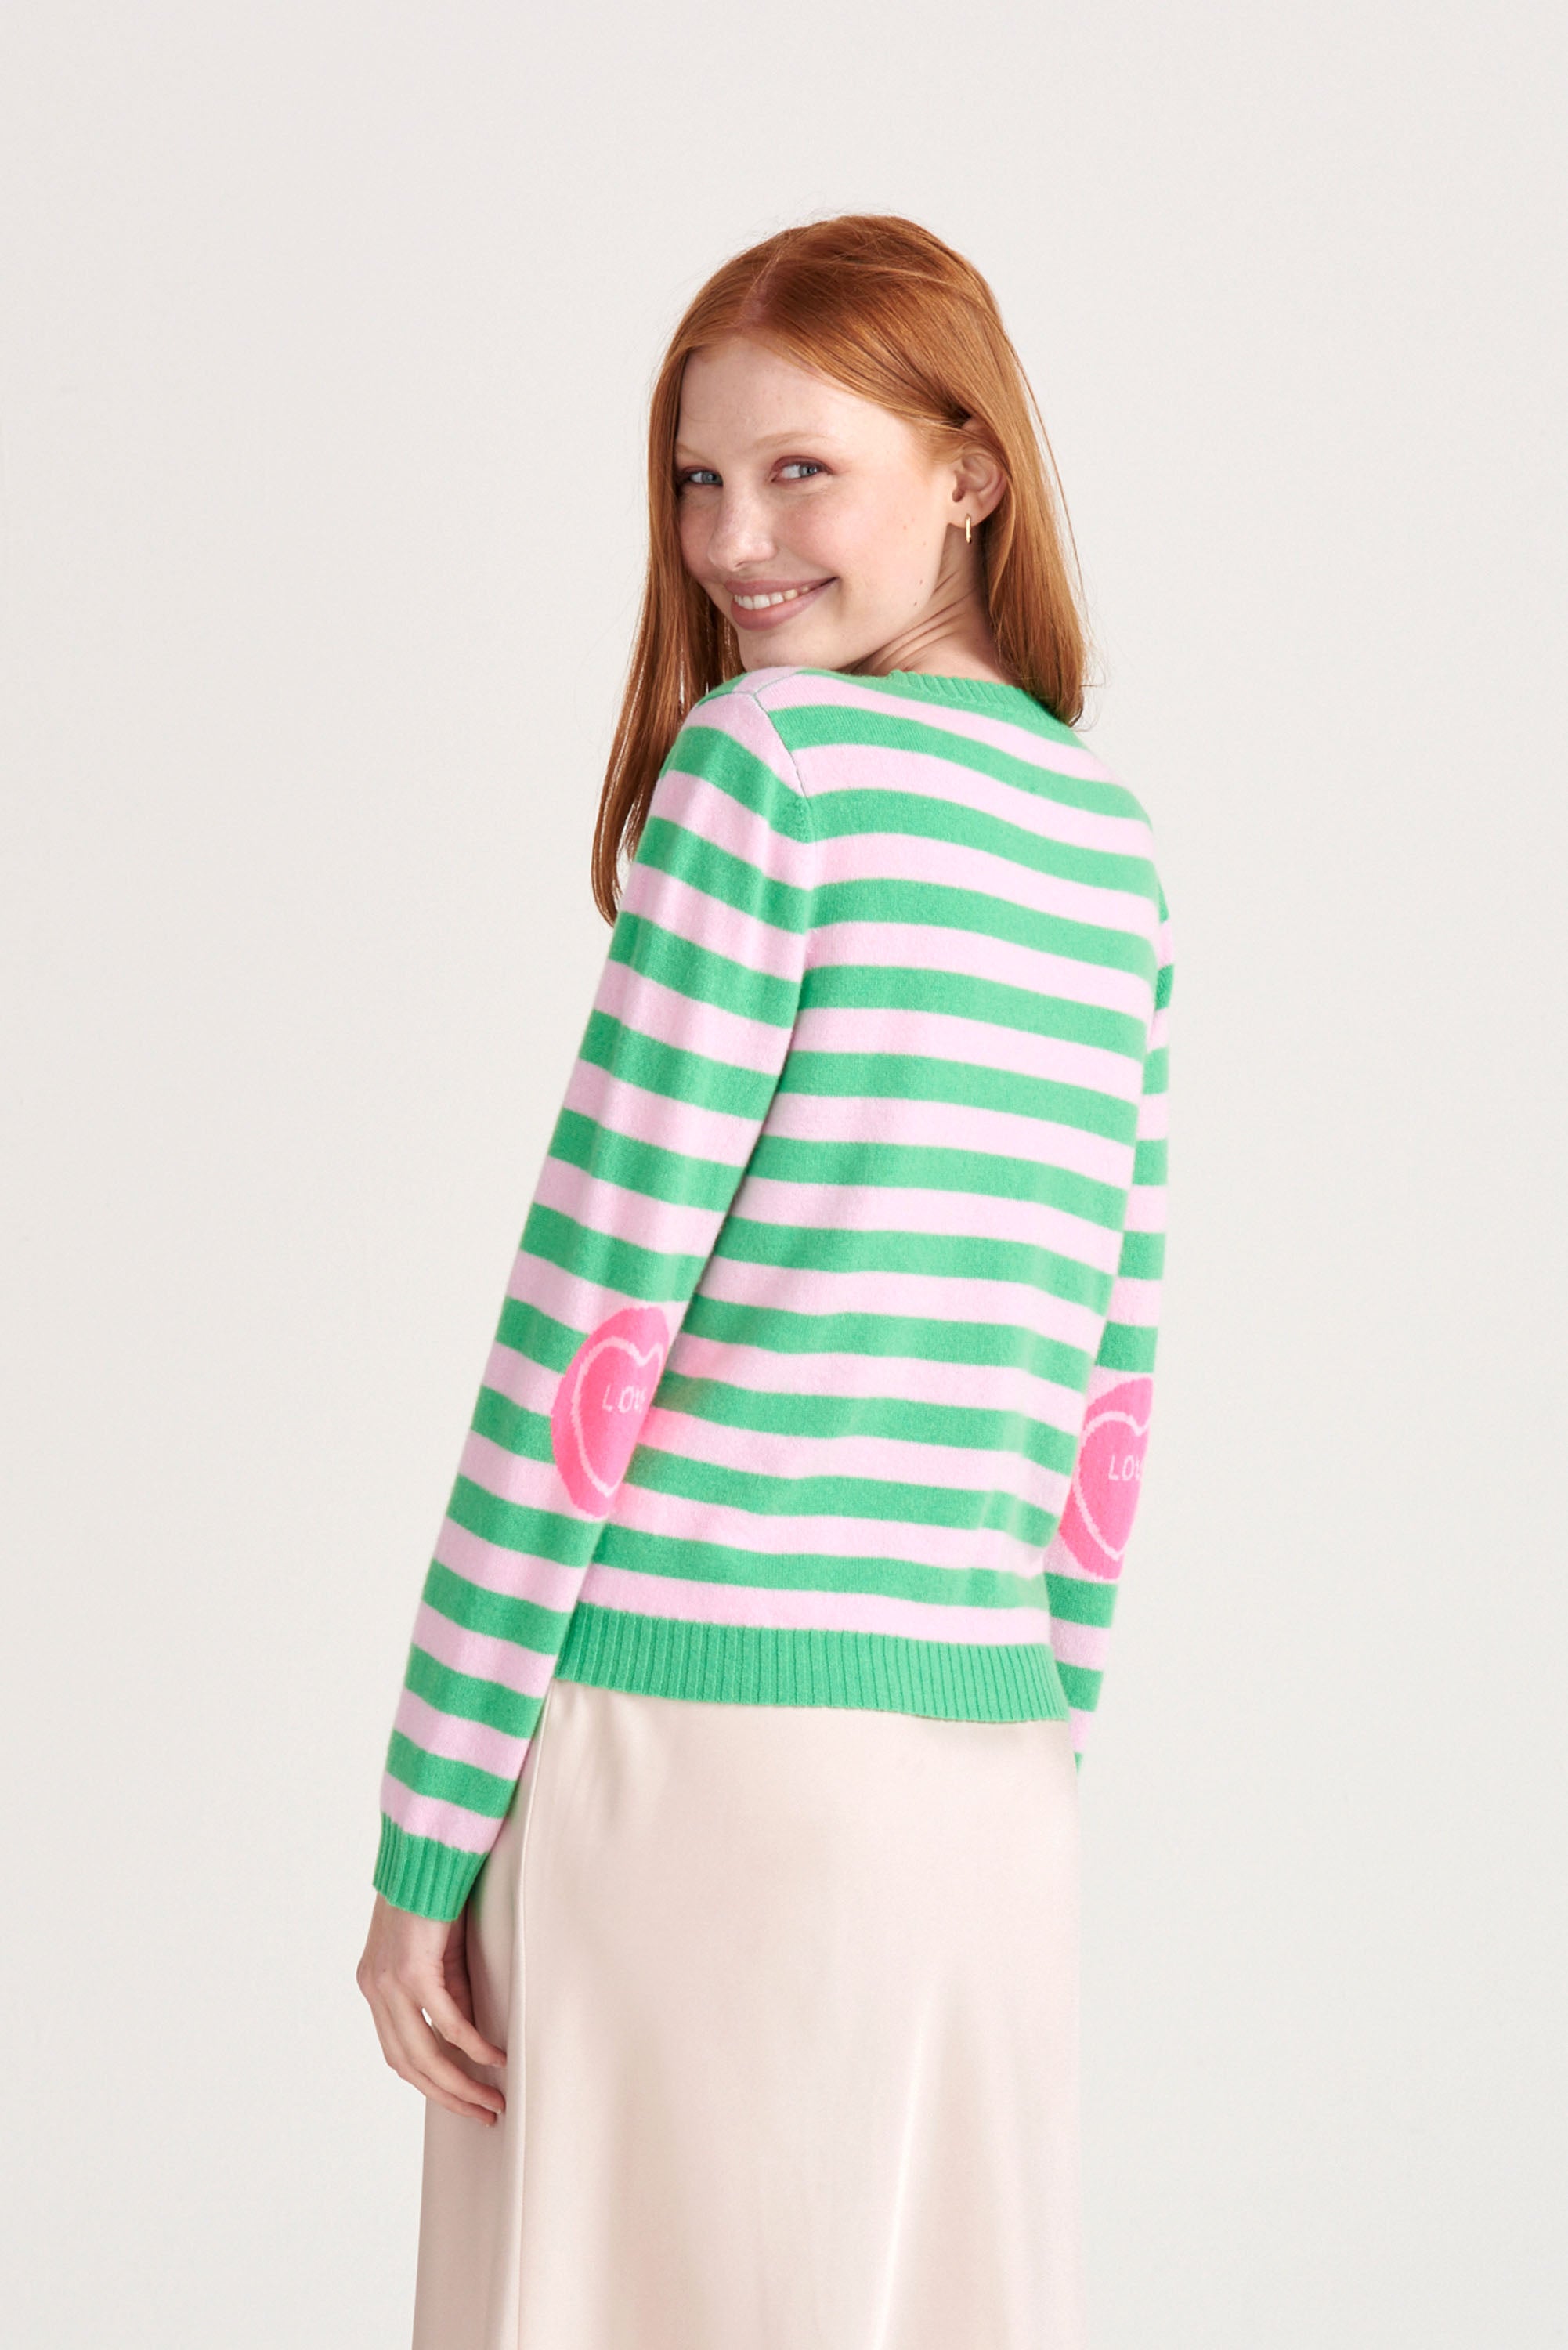 Red haired female model wearing Jumper1234 Bright green and pink stripe cashmere crew neck jumper with neon pink love heart intarsia elbow patches facing away from the camera